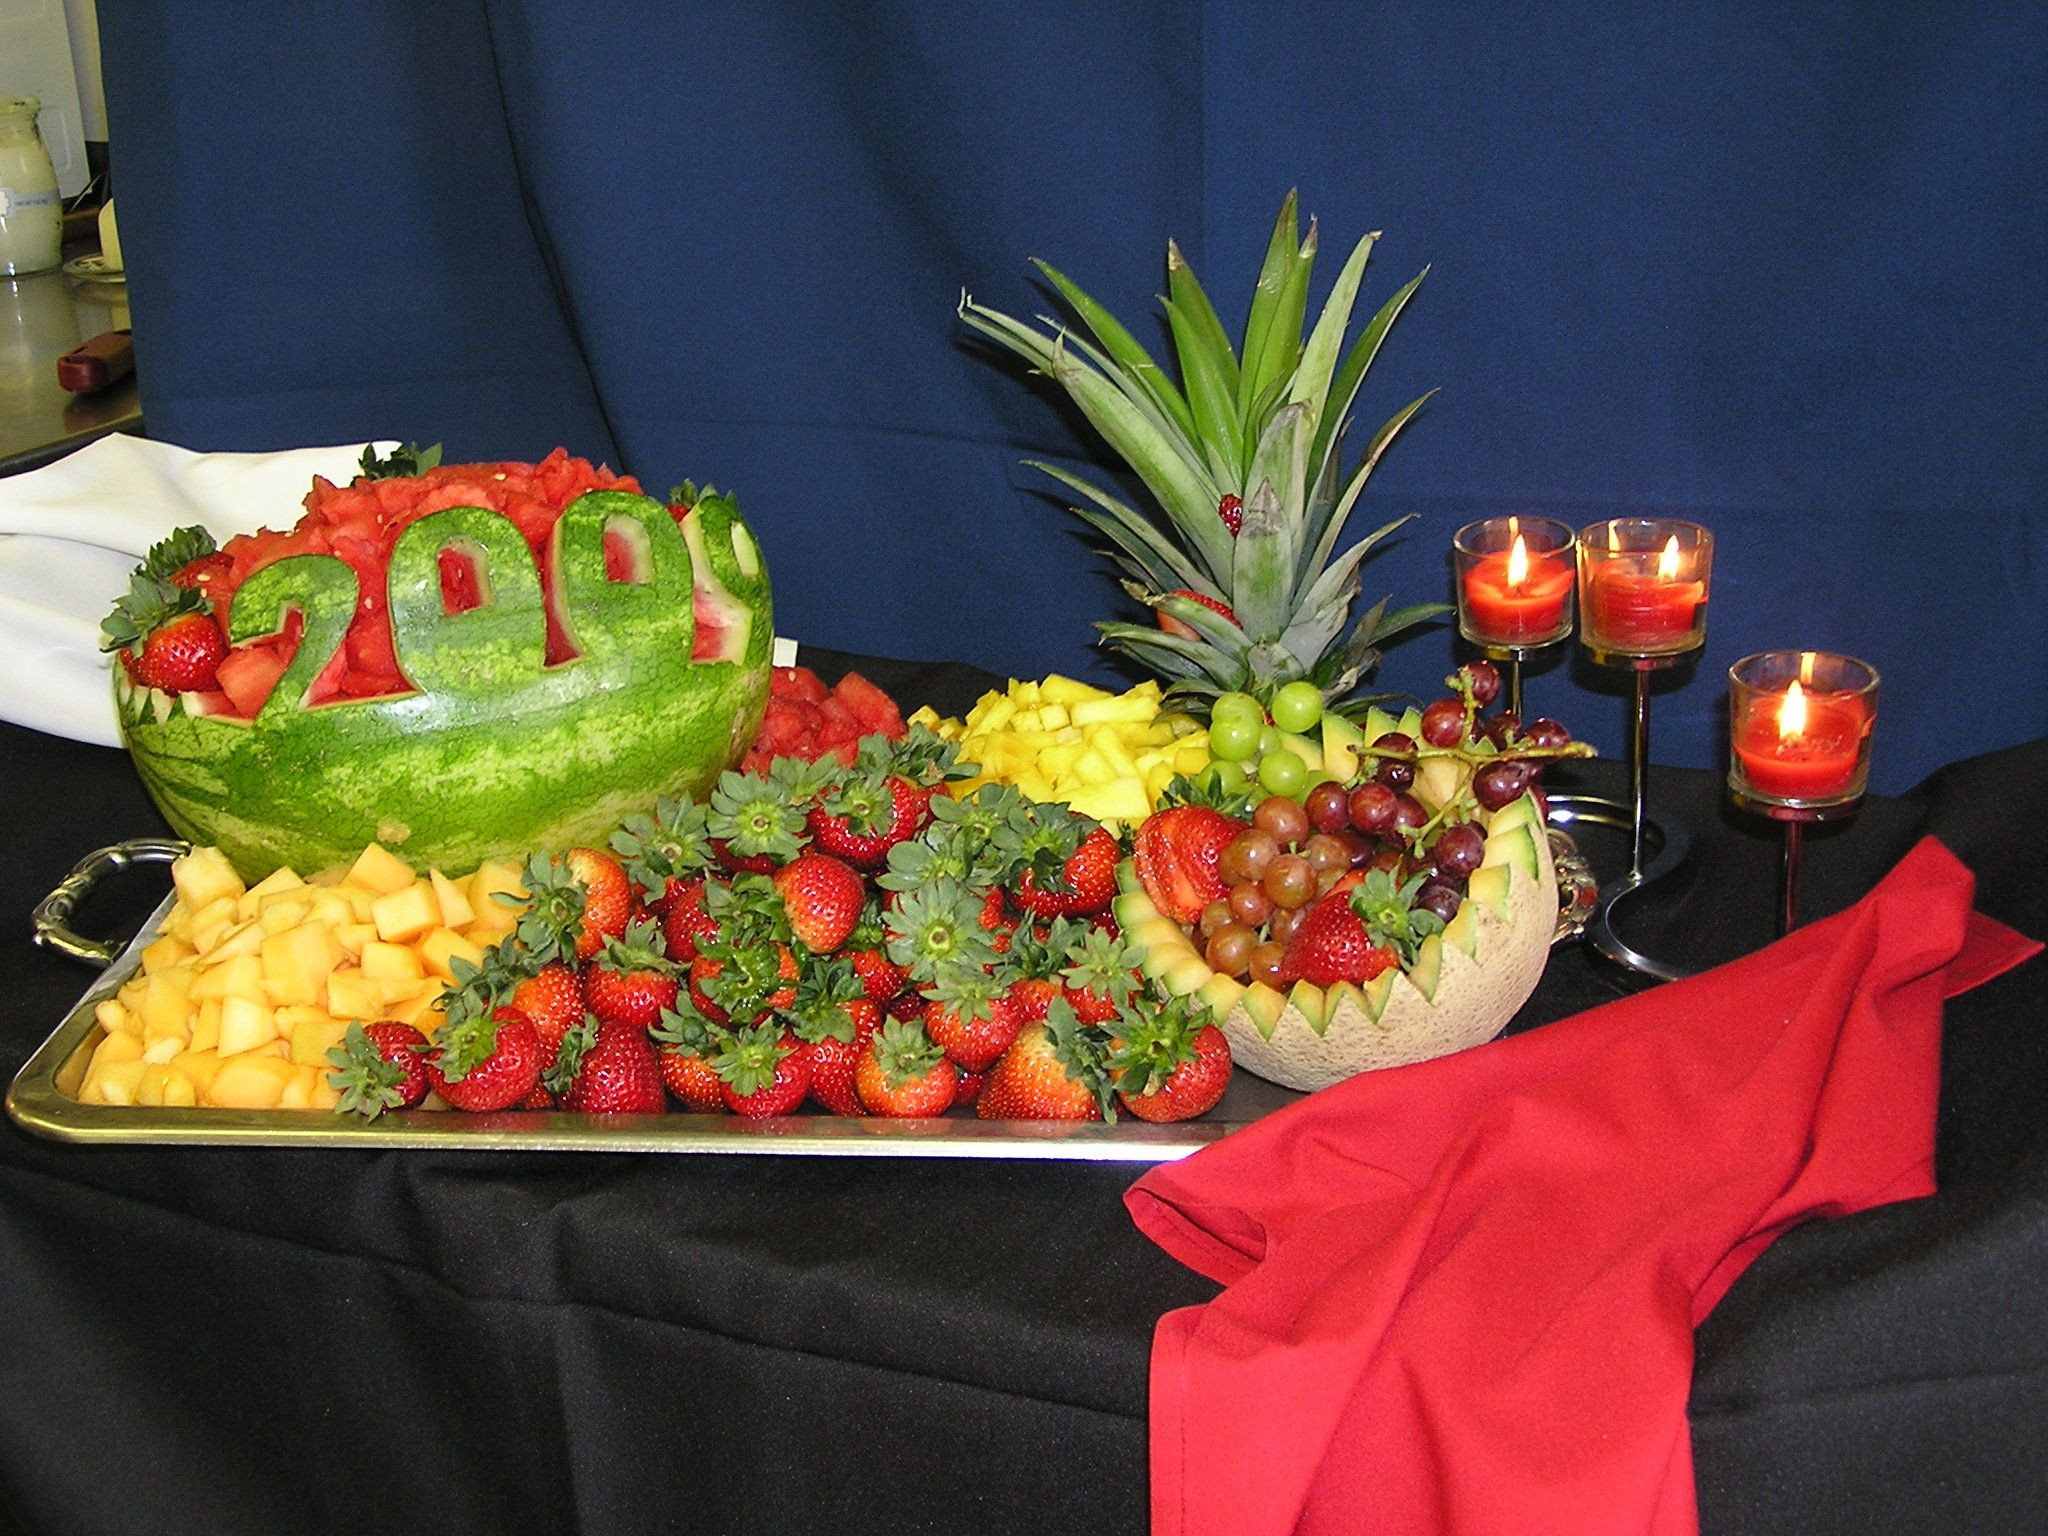 Fruit Tray Ideas For Graduation Party
 Carve a watermelon with the year or name of the graduate